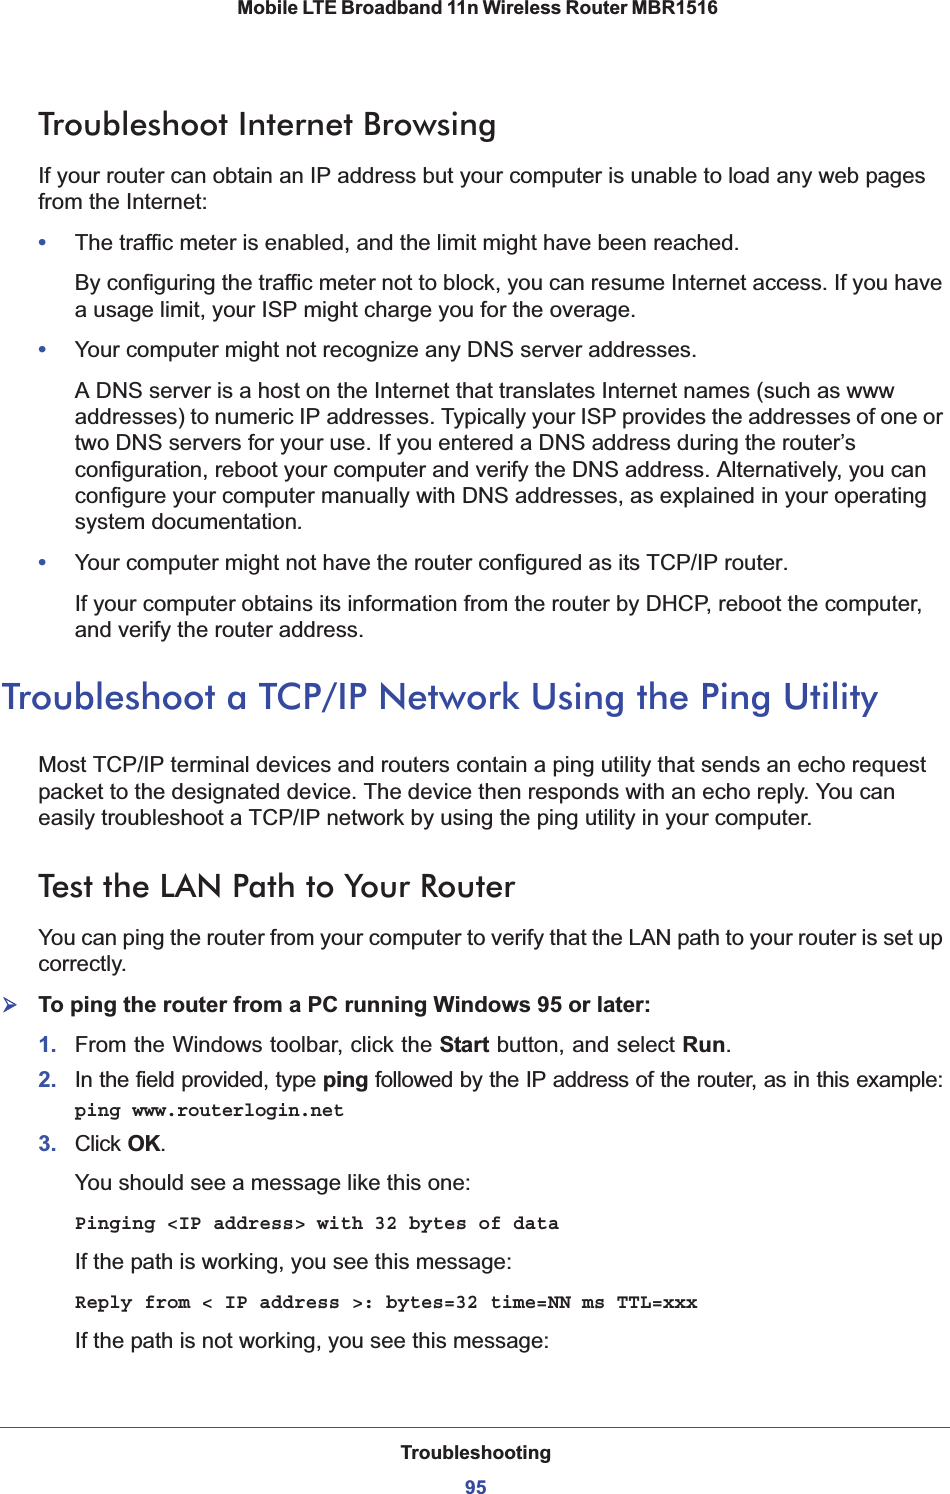 Troubleshooting95 Mobile LTE Broadband 11n Wireless Router MBR1516Troubleshoot Internet BrowsingIf your router can obtain an IP address but your computer is unable to load any web pages from the Internet:•The traffic meter is enabled, and the limit might have been reached.By configuring the traffic meter not to block, you can resume Internet access. If you have a usage limit, your ISP might charge you for the overage. •Your computer might not recognize any DNS server addresses. A DNS server is a host on the Internet that translates Internet names (such as www addresses) to numeric IP addresses. Typically your ISP provides the addresses of one or two DNS servers for your use. If you entered a DNS address during the router’s configuration, reboot your computer and verify the DNS address. Alternatively, you can configure your computer manually with DNS addresses, as explained in your operating system documentation.•Your computer might not have the router configured as its TCP/IP router.If your computer obtains its information from the router by DHCP, reboot the computer, and verify the router address.Troubleshoot a TCP/IP Network Using the Ping UtilityMost TCP/IP terminal devices and routers contain a ping utility that sends an echo request packet to the designated device. The device then responds with an echo reply. You can easily troubleshoot a TCP/IP network by using the ping utility in your computer.Test the LAN Path to Your RouterYou can ping the router from your computer to verify that the LAN path to your router is set up correctly.¾To ping the router from a PC running Windows 95 or later:1. From the Windows toolbar, click the Start button, and select Run.2. In the field provided, type ping followed by the IP address of the router, as in this example:ping www.routerlogin.net3. Click OK.You should see a message like this one:Pinging &lt;IP address&gt; with 32 bytes of dataIf the path is working, you see this message:Reply from &lt; IP address &gt;: bytes=32 time=NN ms TTL=xxxIf the path is not working, you see this message: